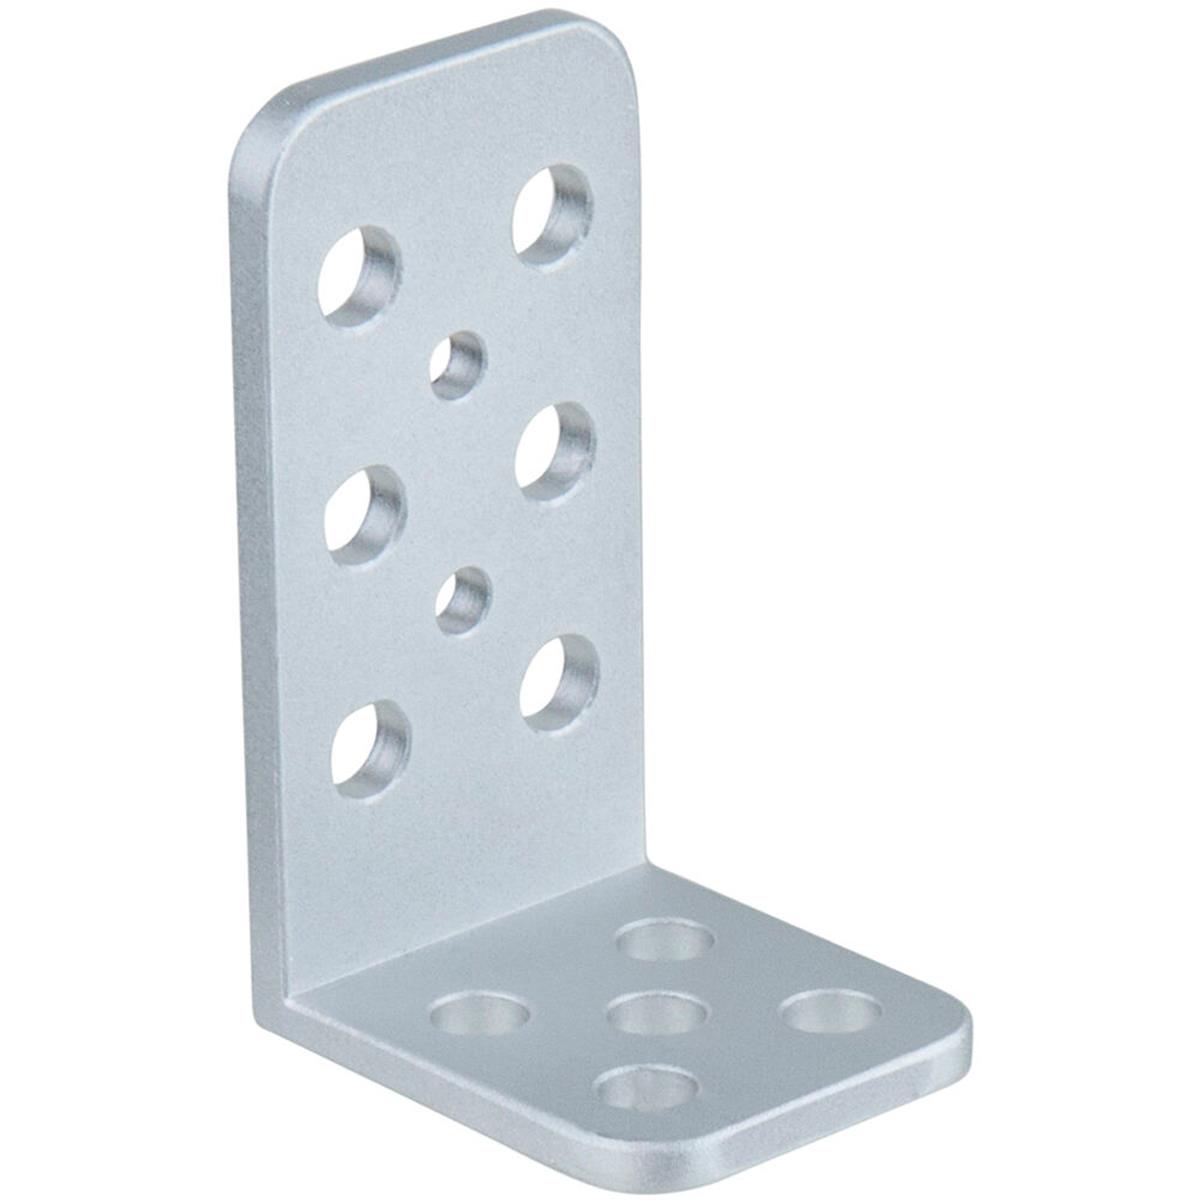 Photos - Camcorder Accessory Kupo 2.3x3.9" Mini L-Cheese-Plate with 3/8" Holes KG082012 